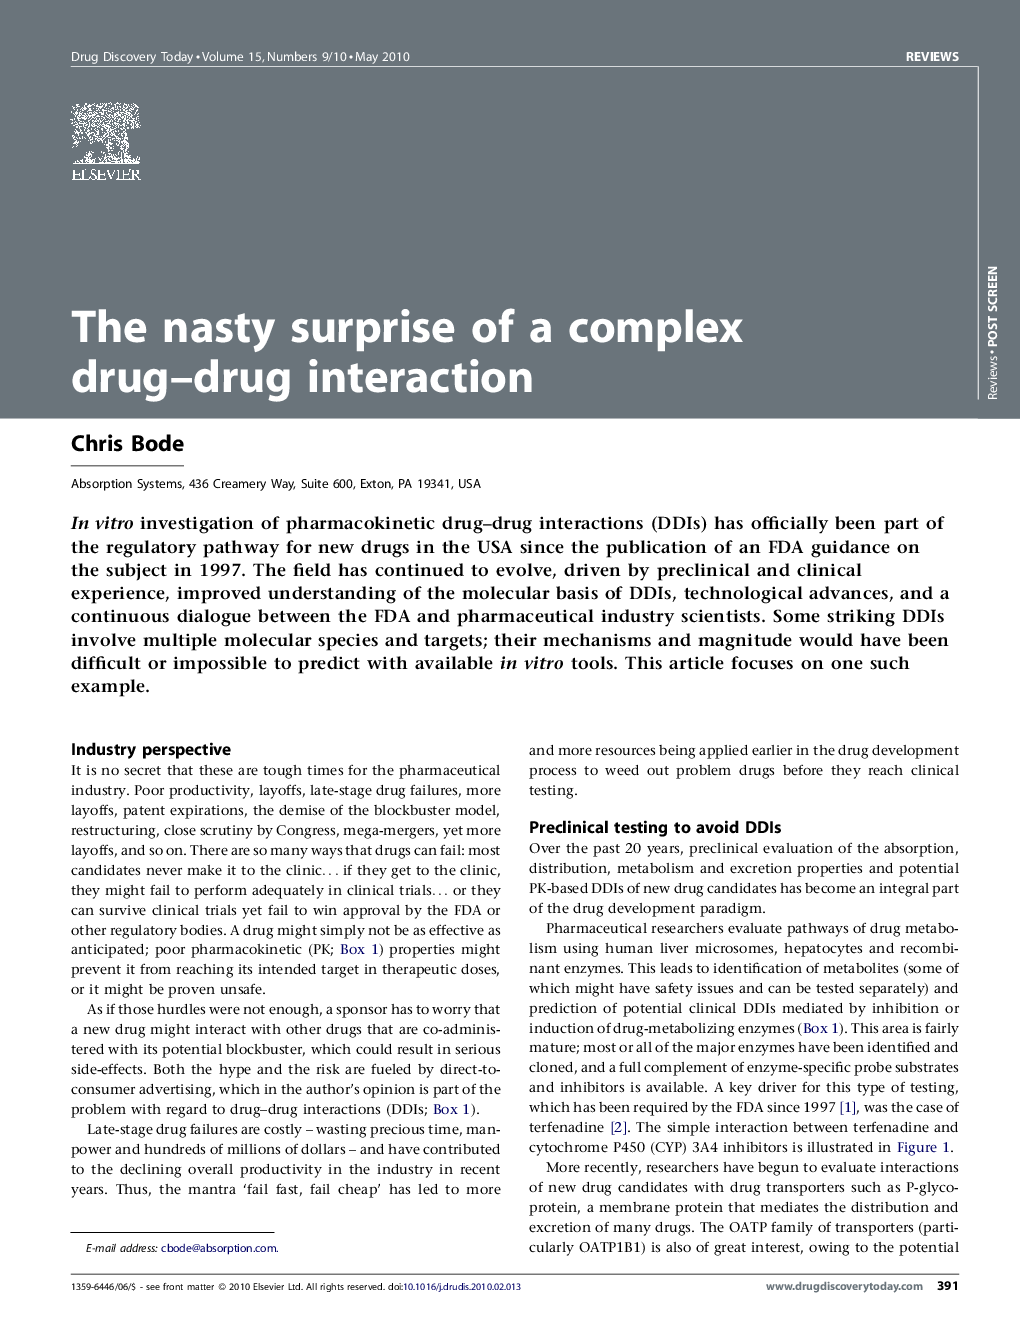 The nasty surprise of a complex drug-drug interaction